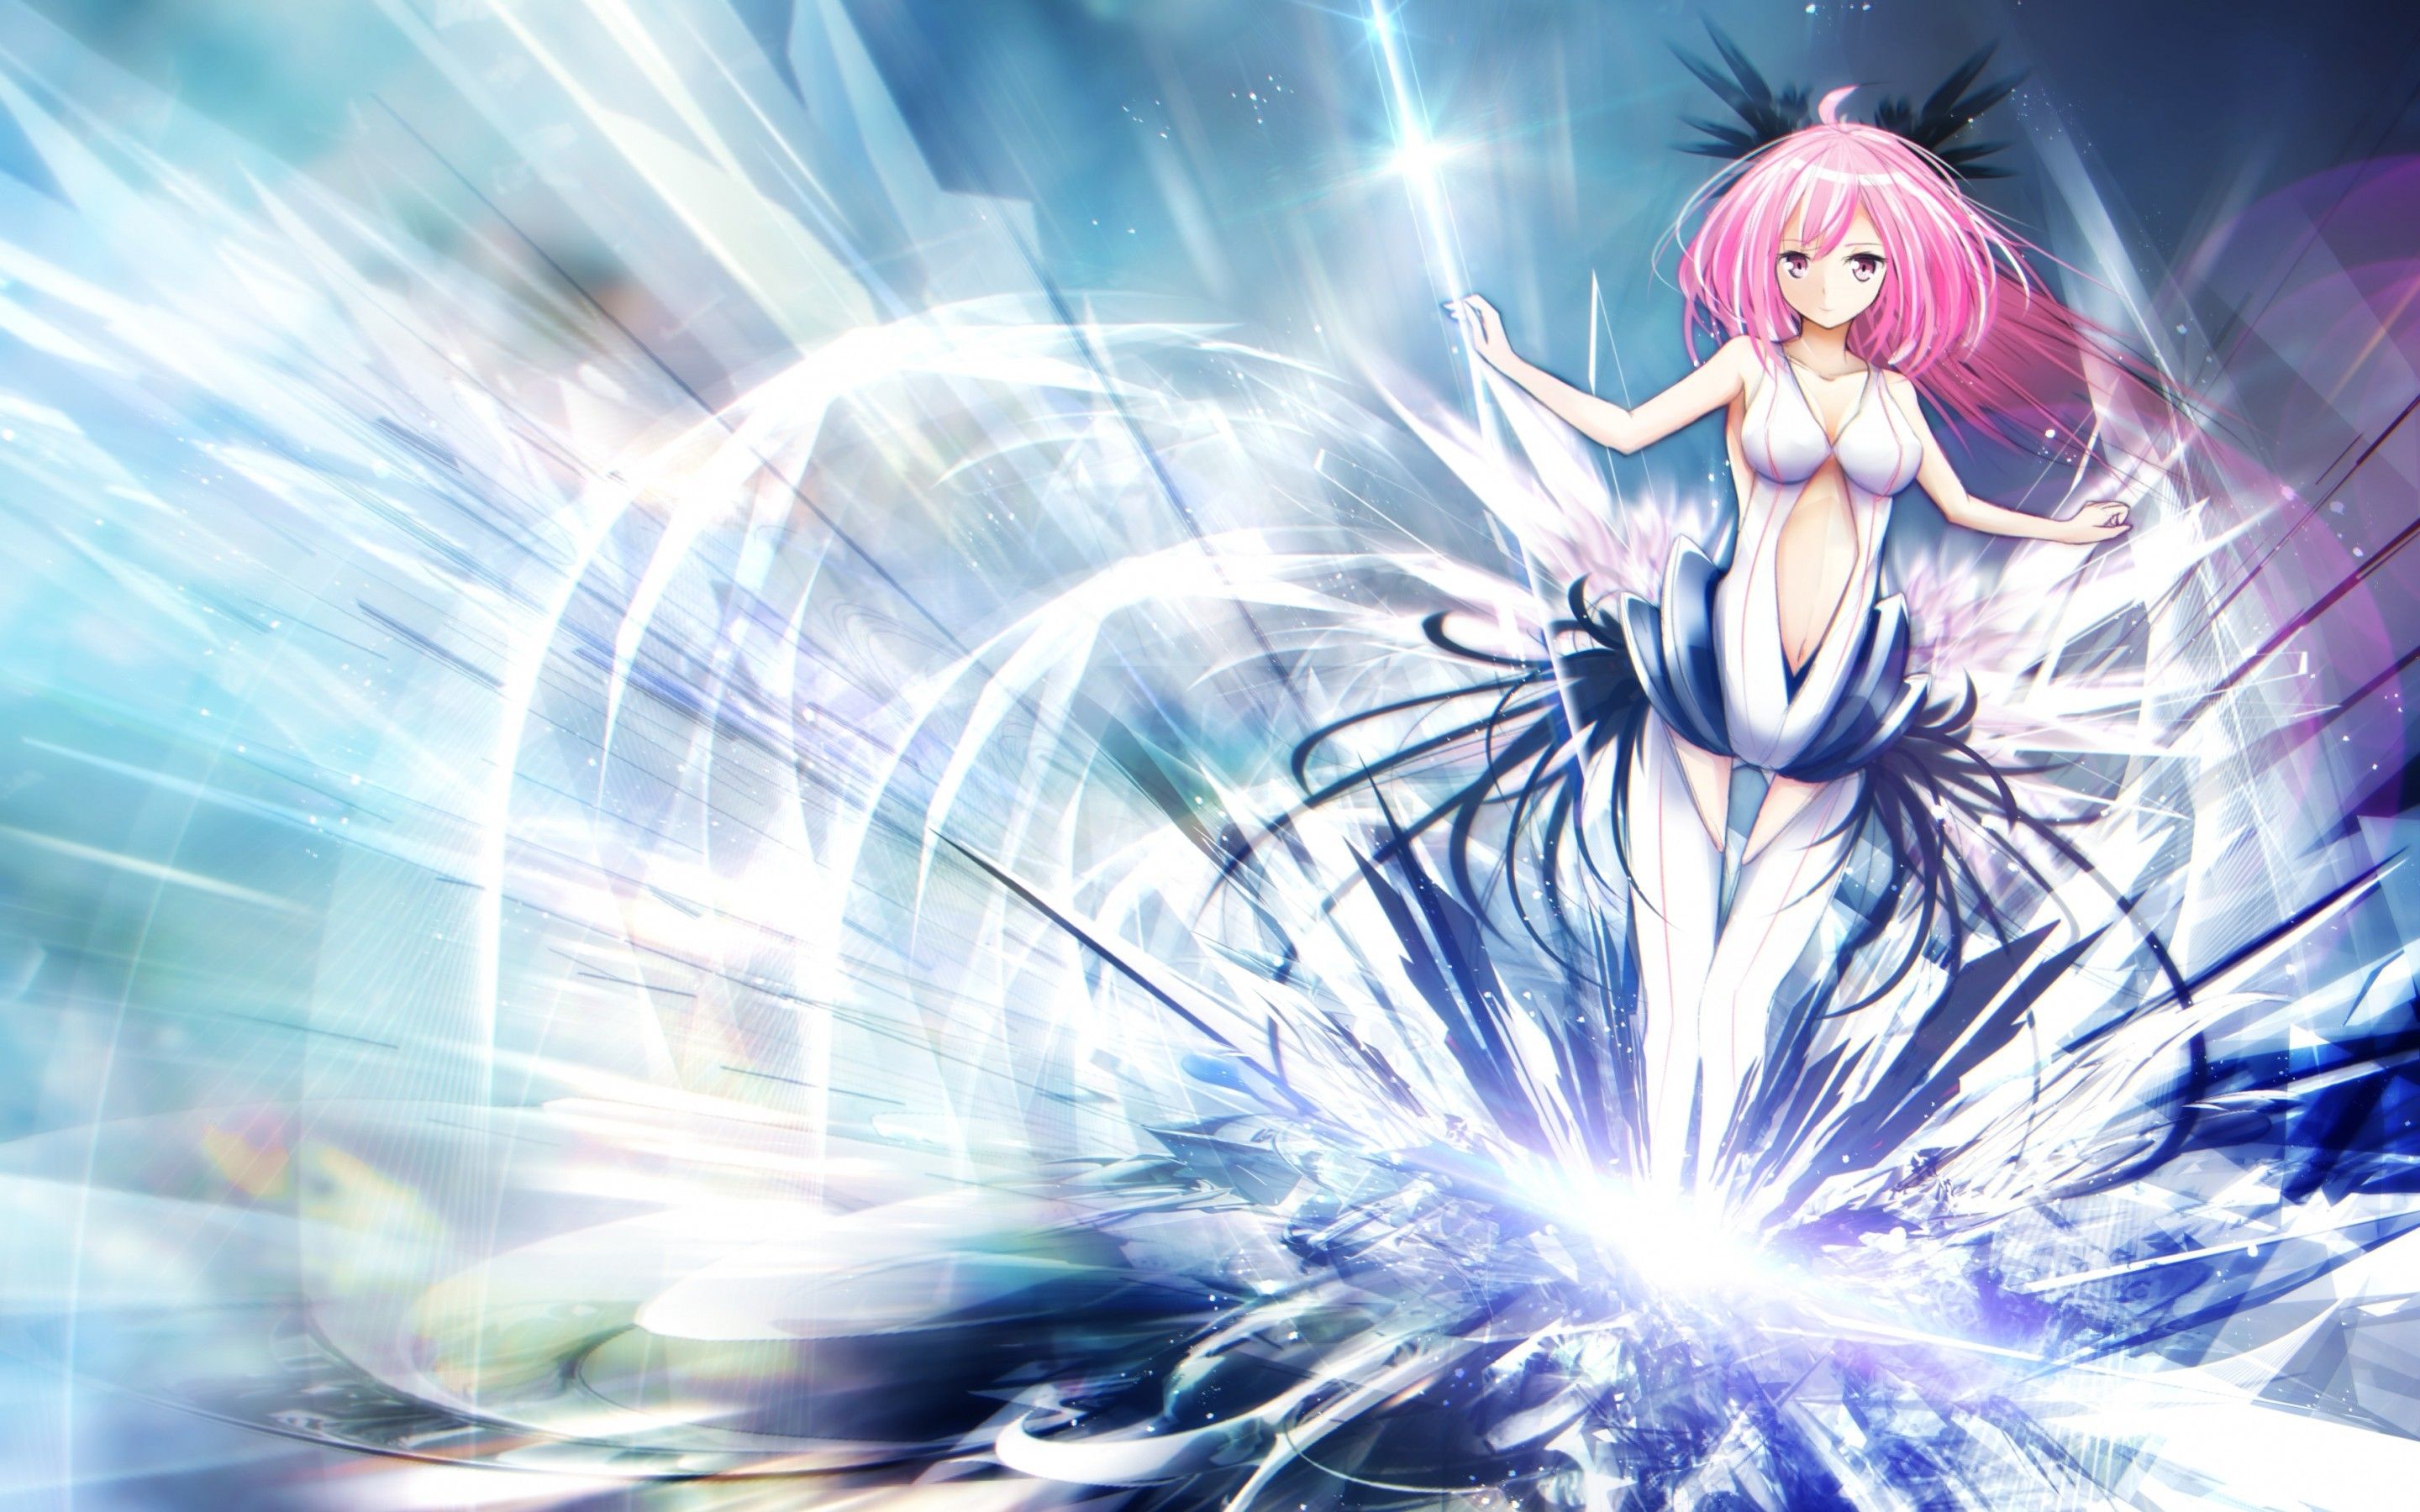 Download 2880x1800 Anime Girl, Magic, Pink Hair, Lights Wallpaper for MacBook Pro 15 inch